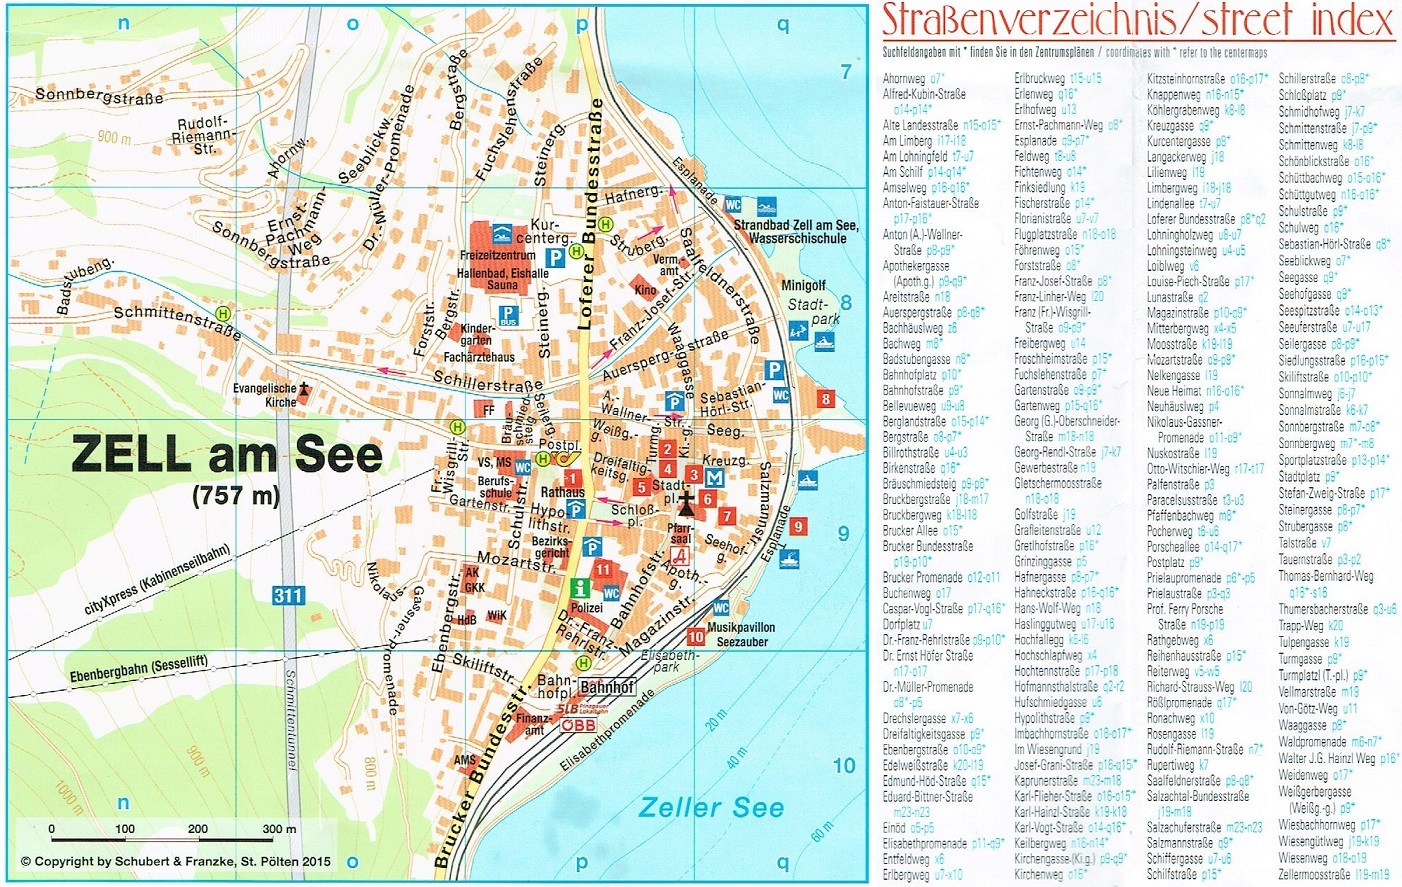 Hotels in Zell am Main map, Attractions, Hotels, City Layout, Subway, Zell am Main metro map, Attractions, Hotels, City Layout, Subway, Map of Zell am Main city centre